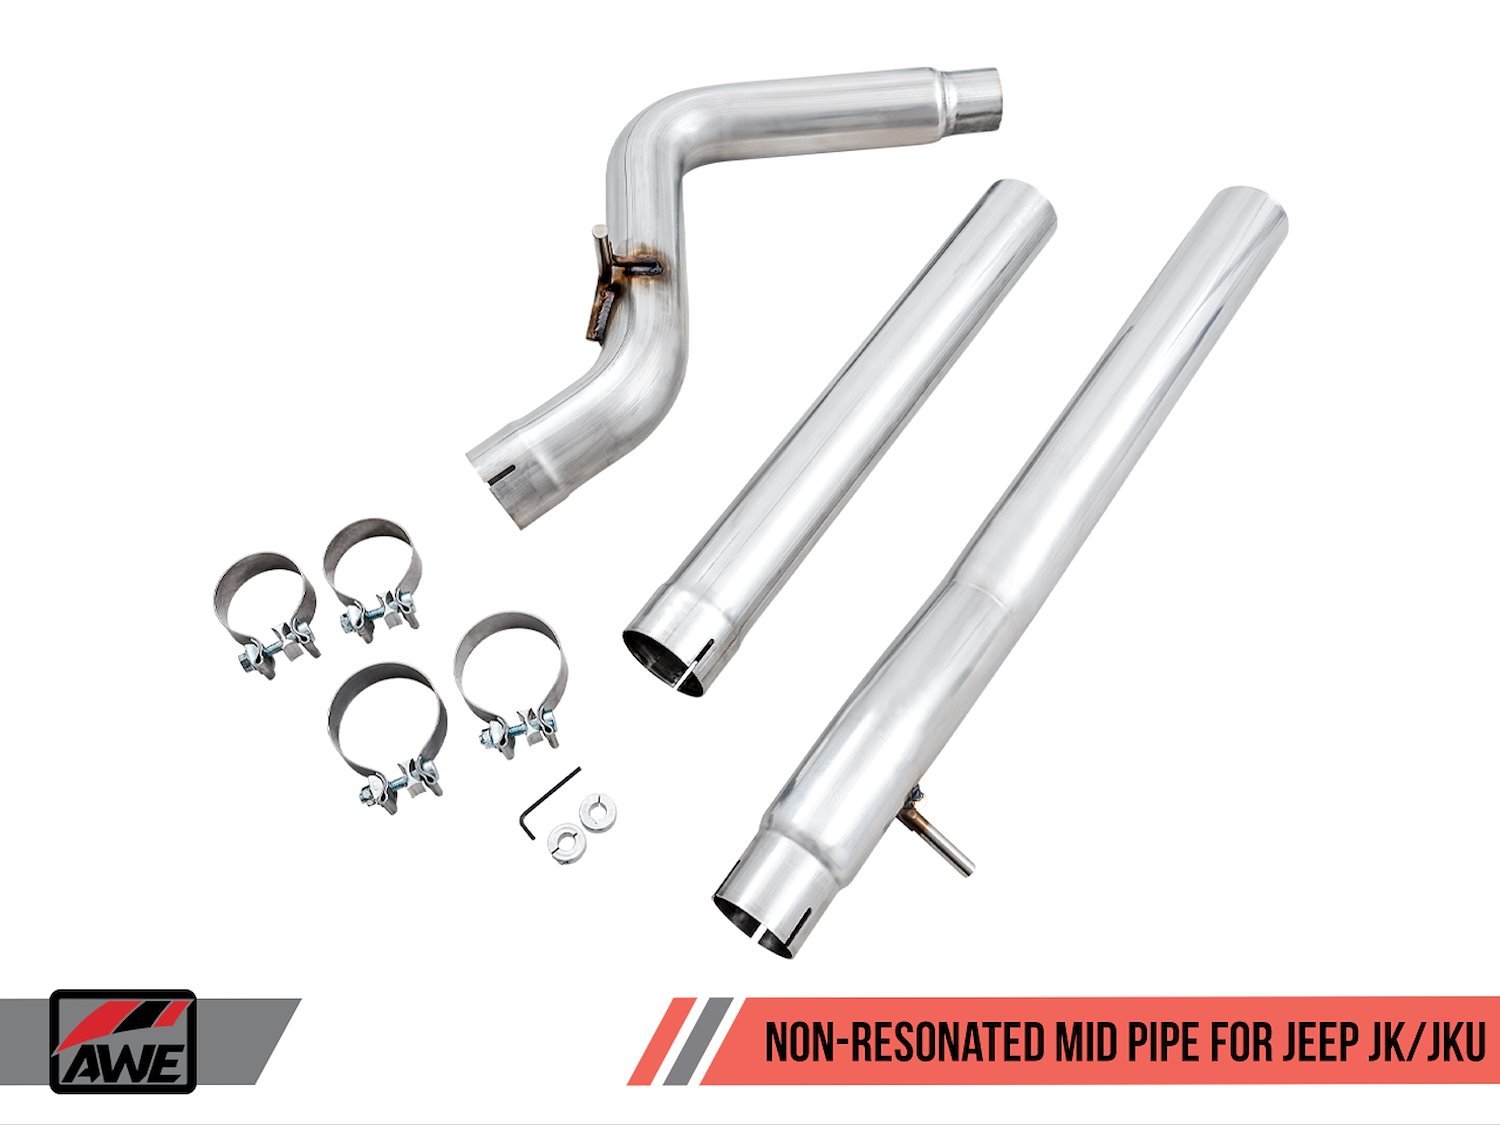 AWE Non-Resonated Mid Pipe for Jeep JK/JKU 3.6L